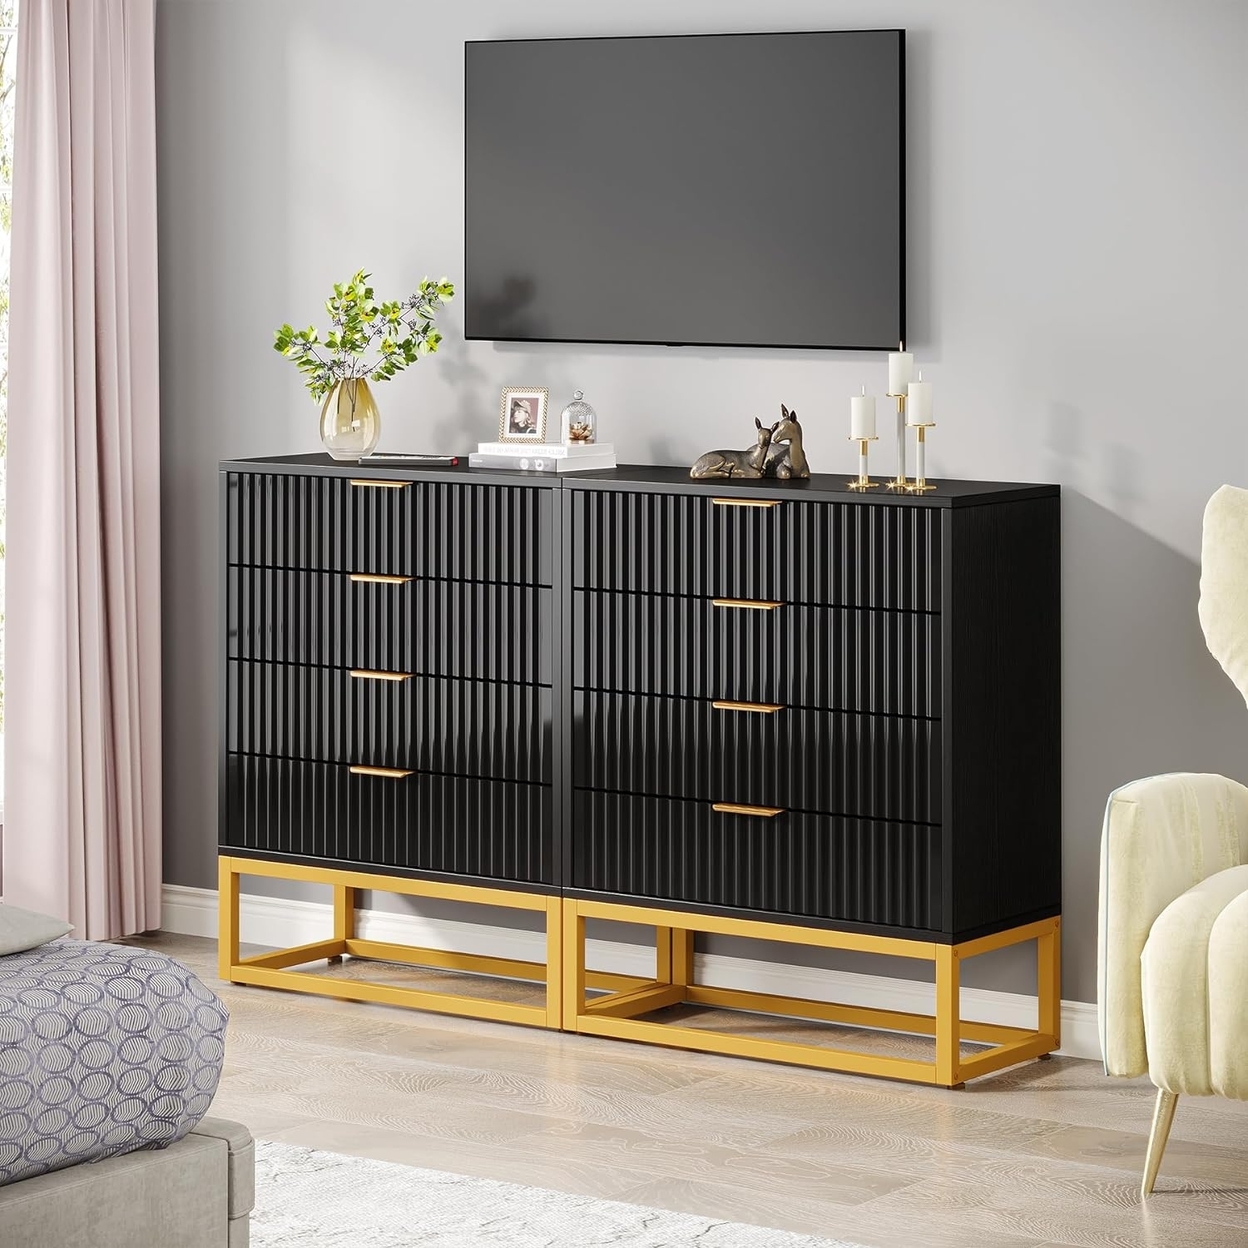 Tribesigns 4 Drawers Dresser, Modern Dressers With Fluted Panel And Metal Frame, Wood Storage Chest Of Drawers - Black & Gold, 2pcs